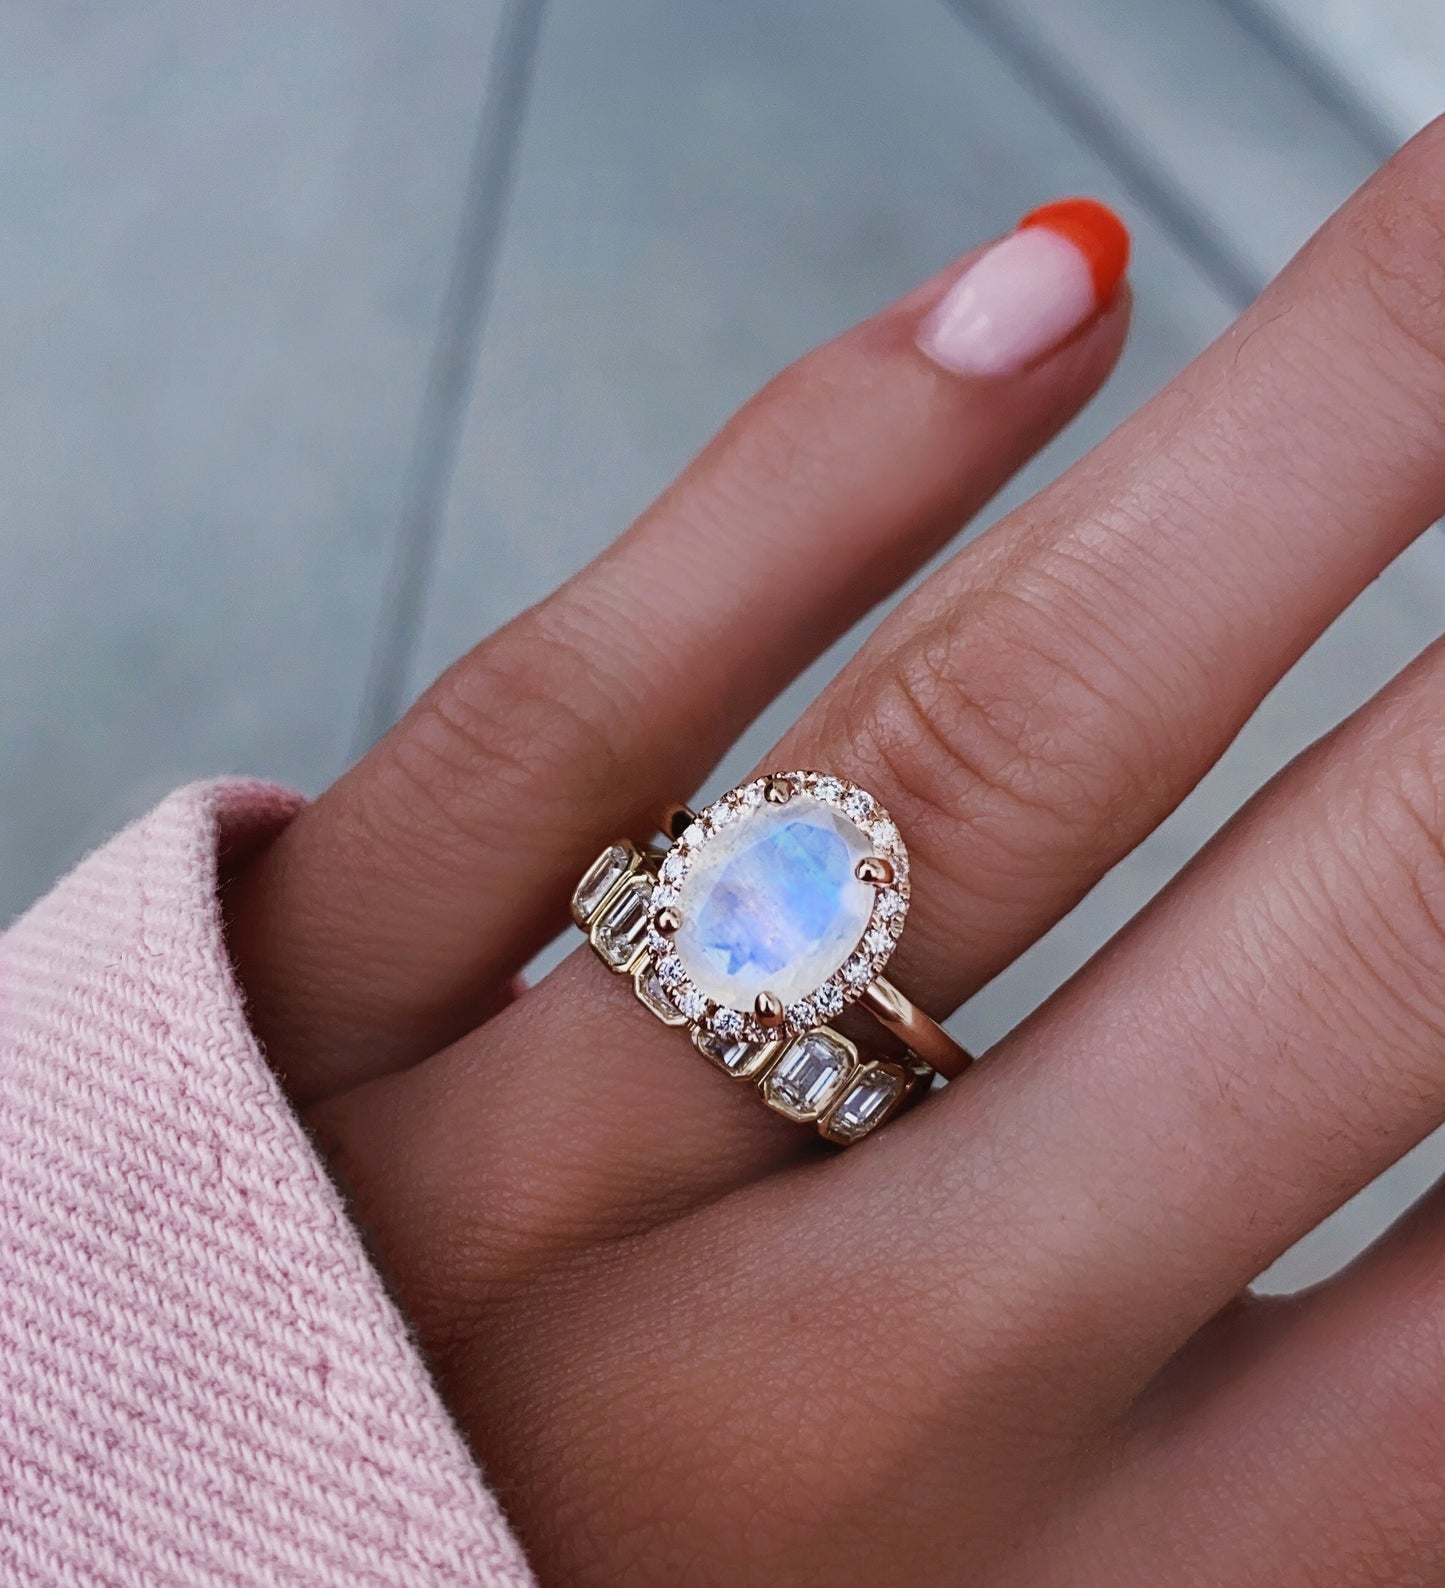 14kt gold and diamond solitaire moonstone ring with halo